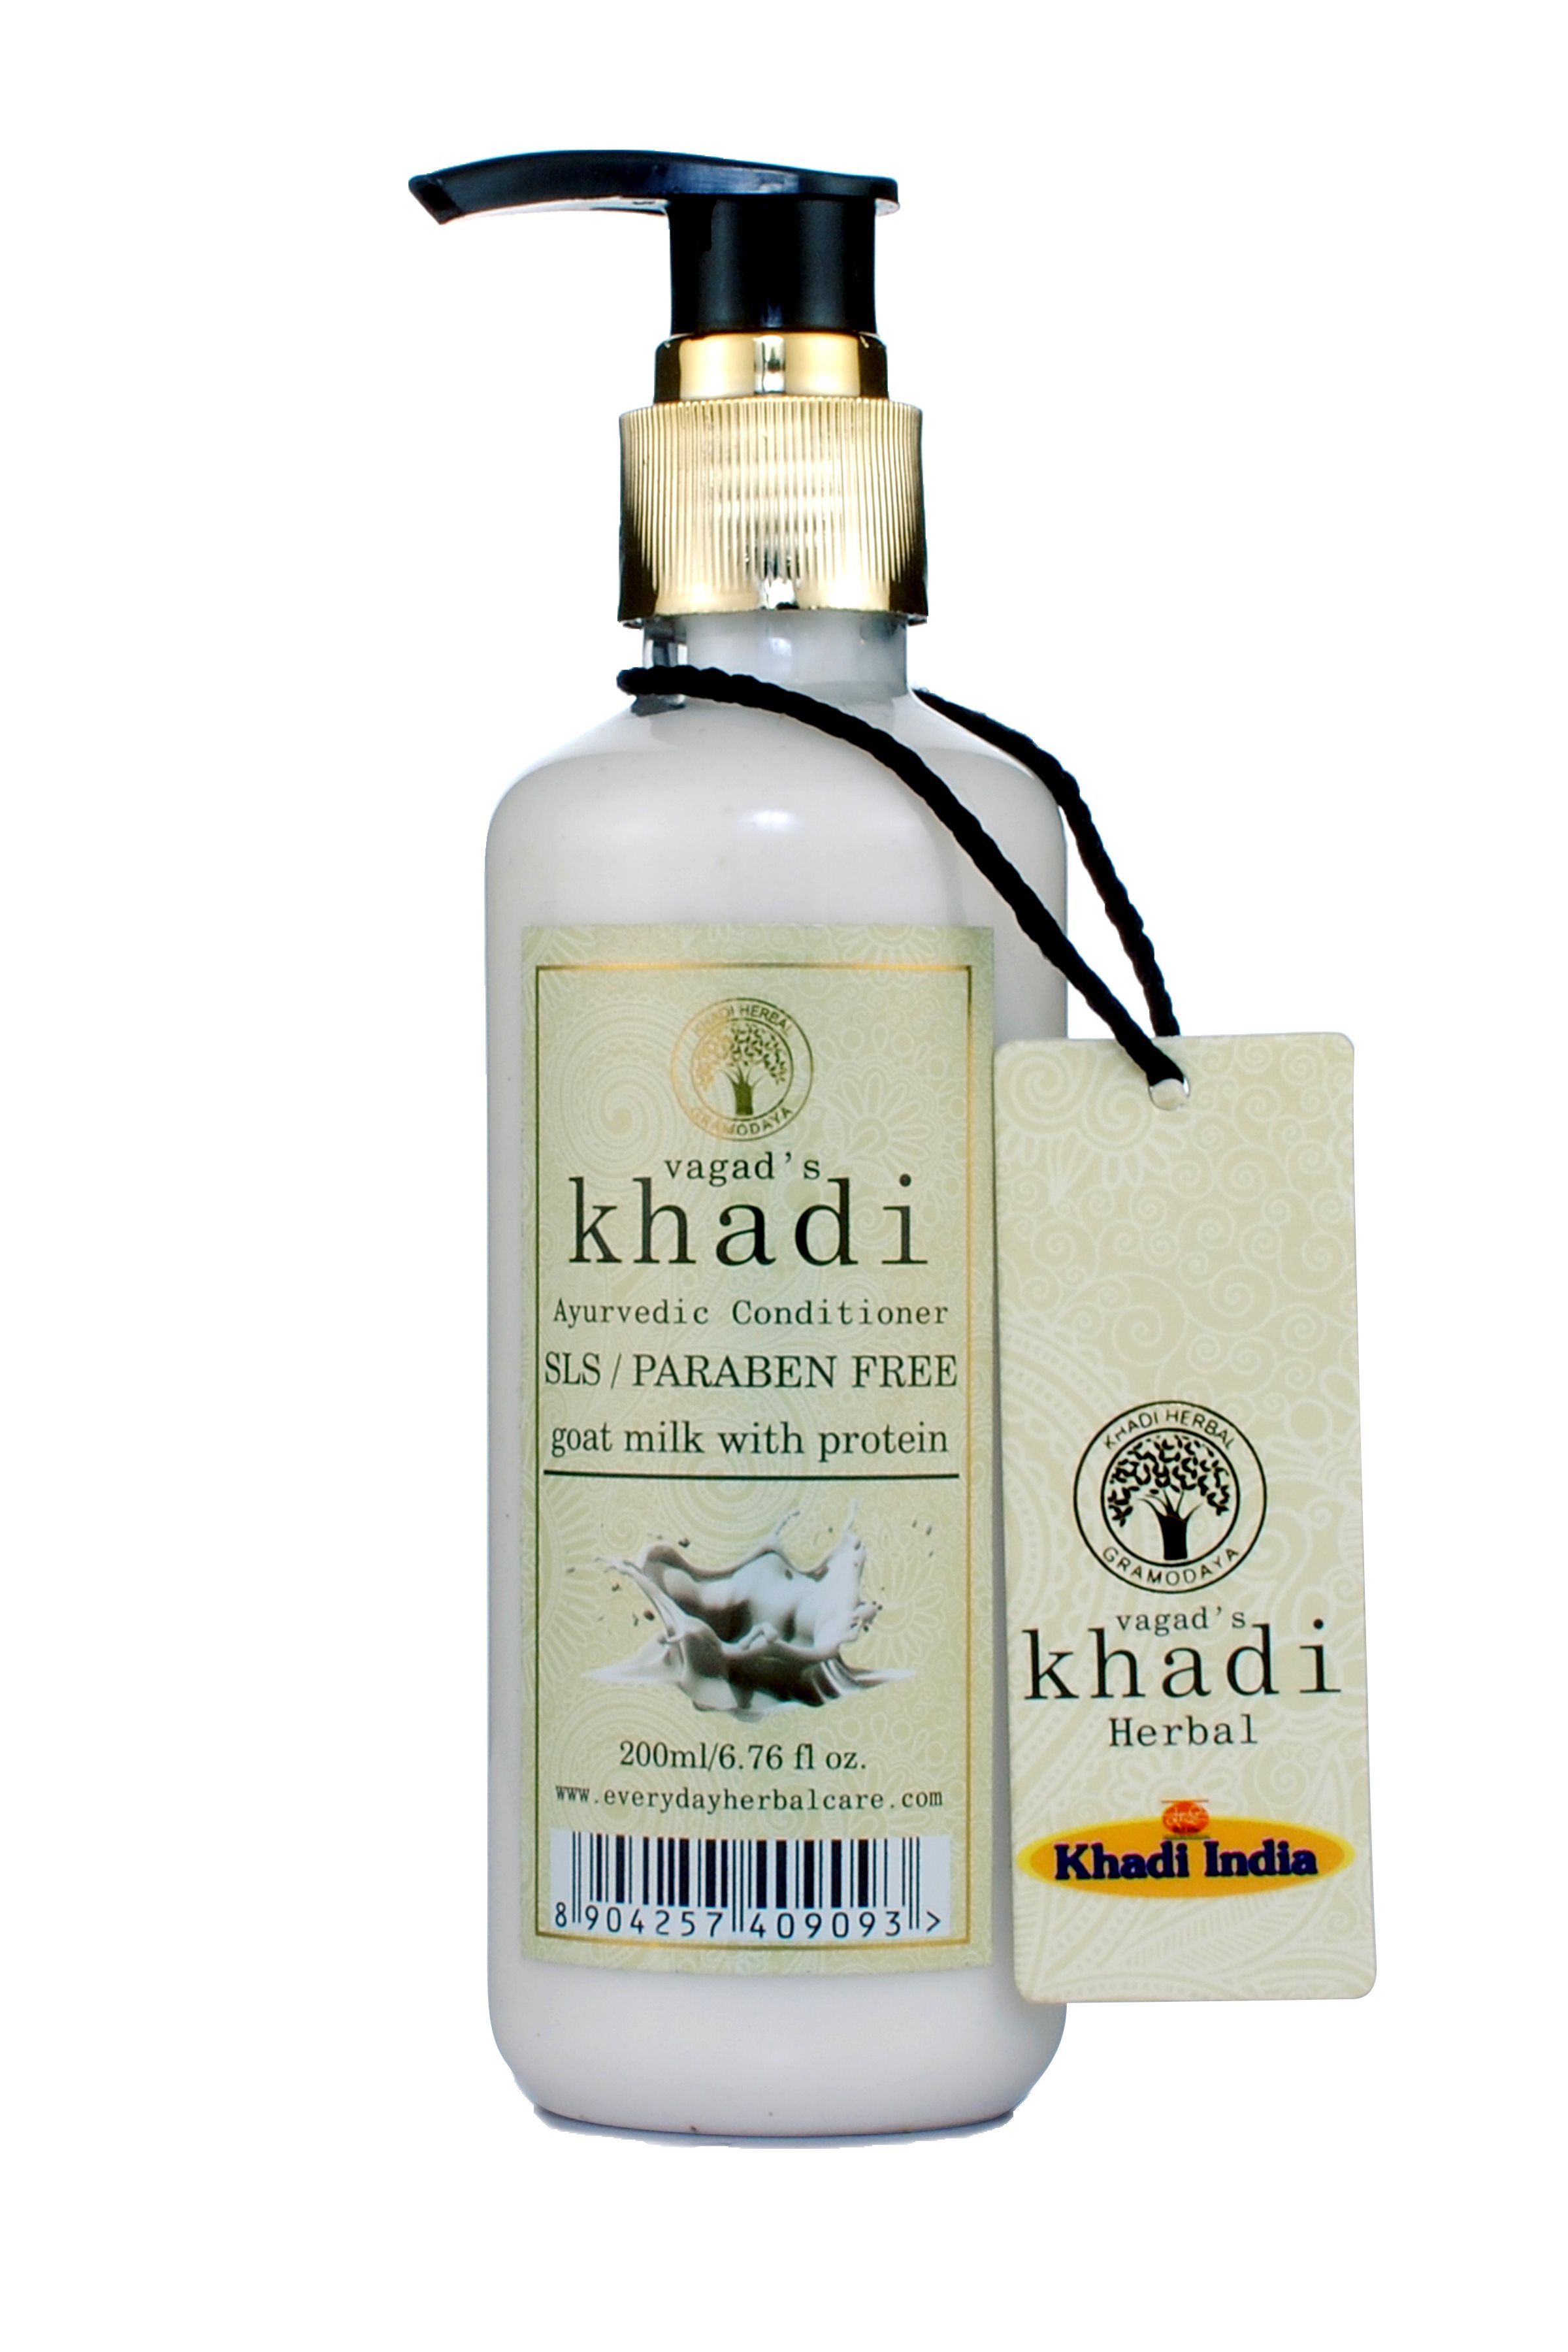 Buy Vagad's Khadi Goat Milk With Protein S L S And Paraben Free Conditioner at Best Price Online